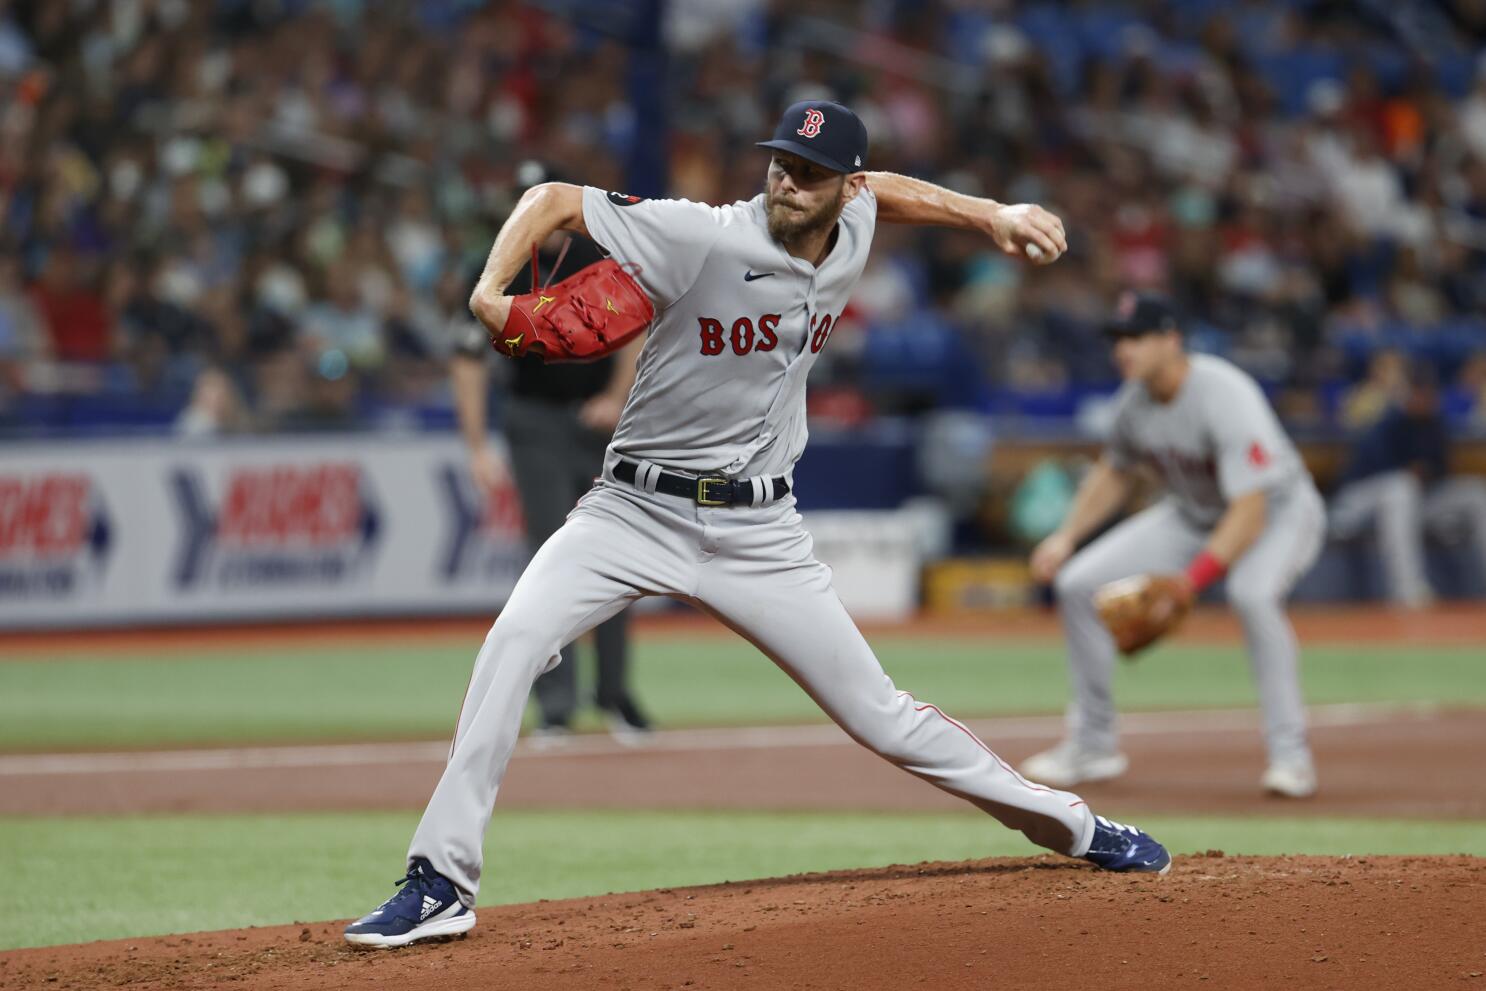 Chris Sale returns from injury, leads Red Sox over Tigers 